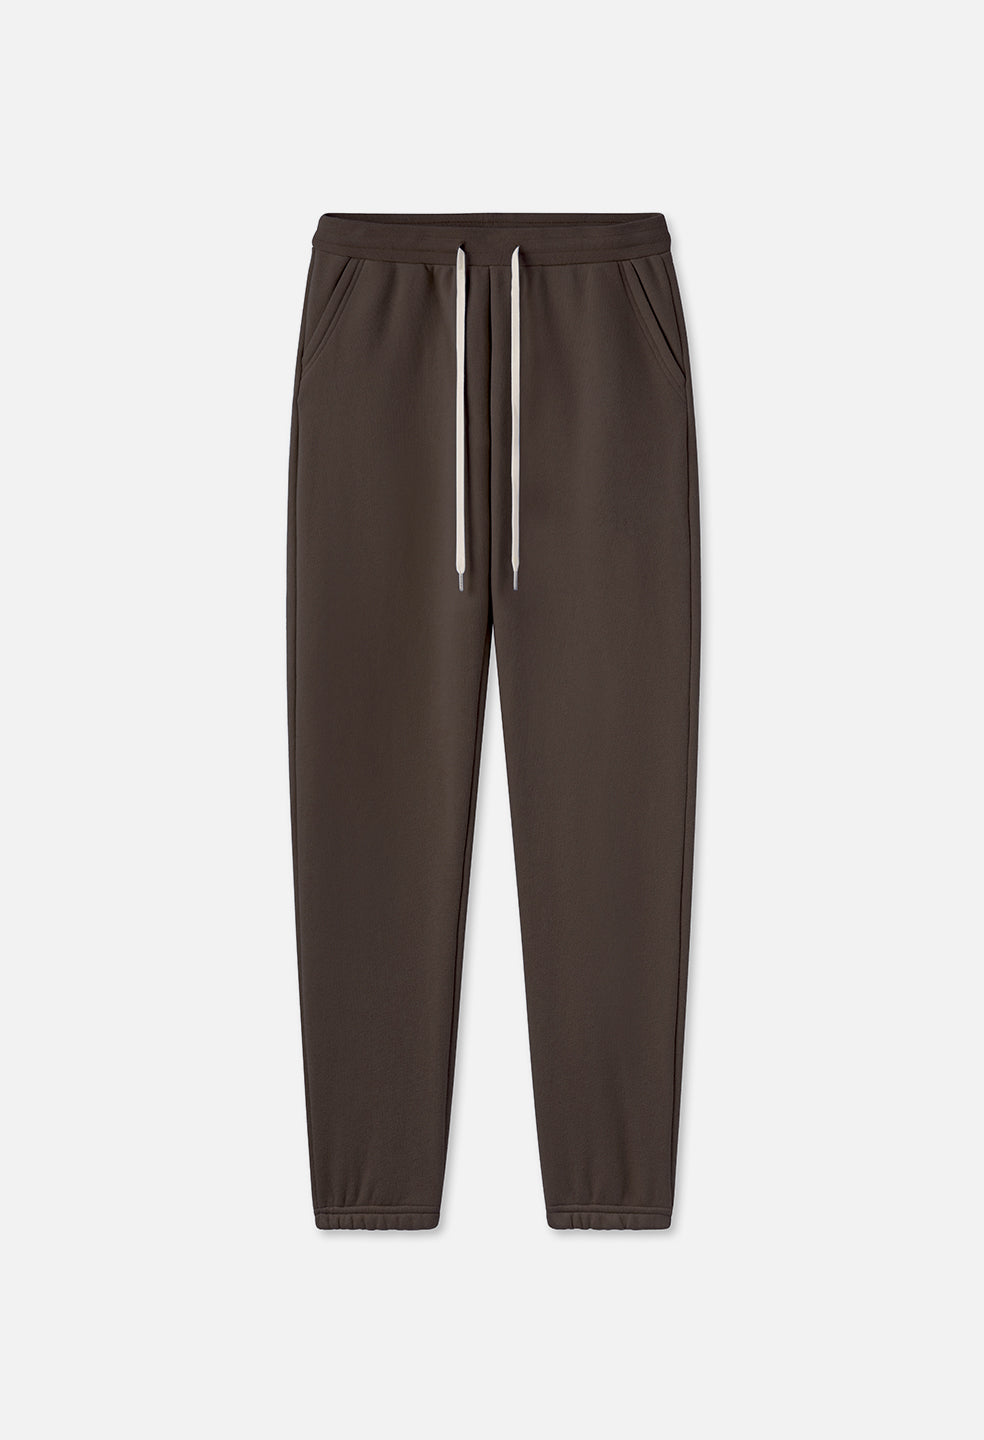 Buy The Children's Place Boys Brown Jogger Pants - NNNOW.com